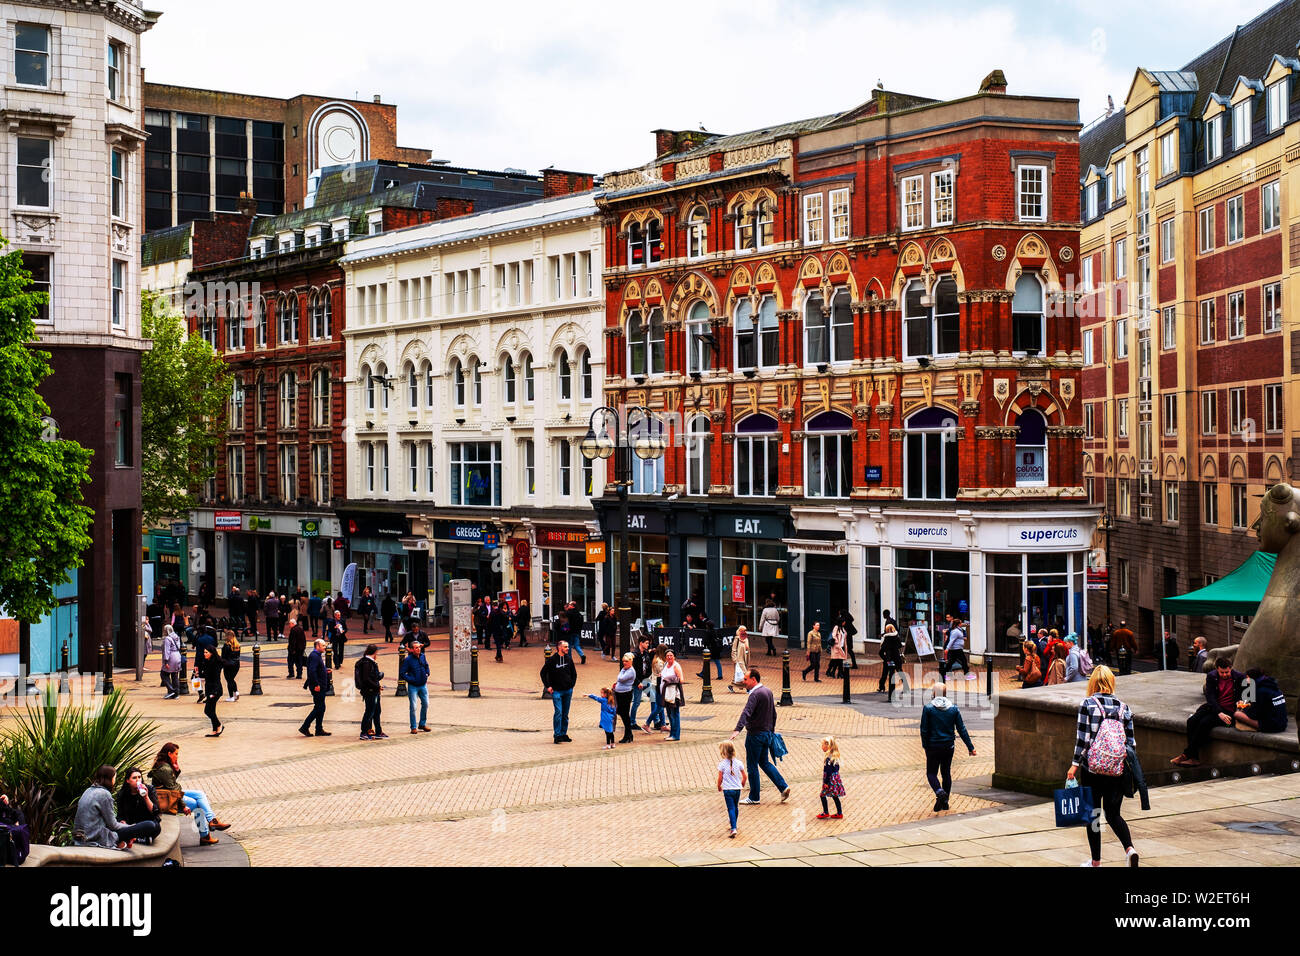 BIRMINGHAM, UK - MAY 19, 2017: Busy street in the city center of Birmingham, UK. Crowded streets with various shops and restaurants during the day Stock Photo